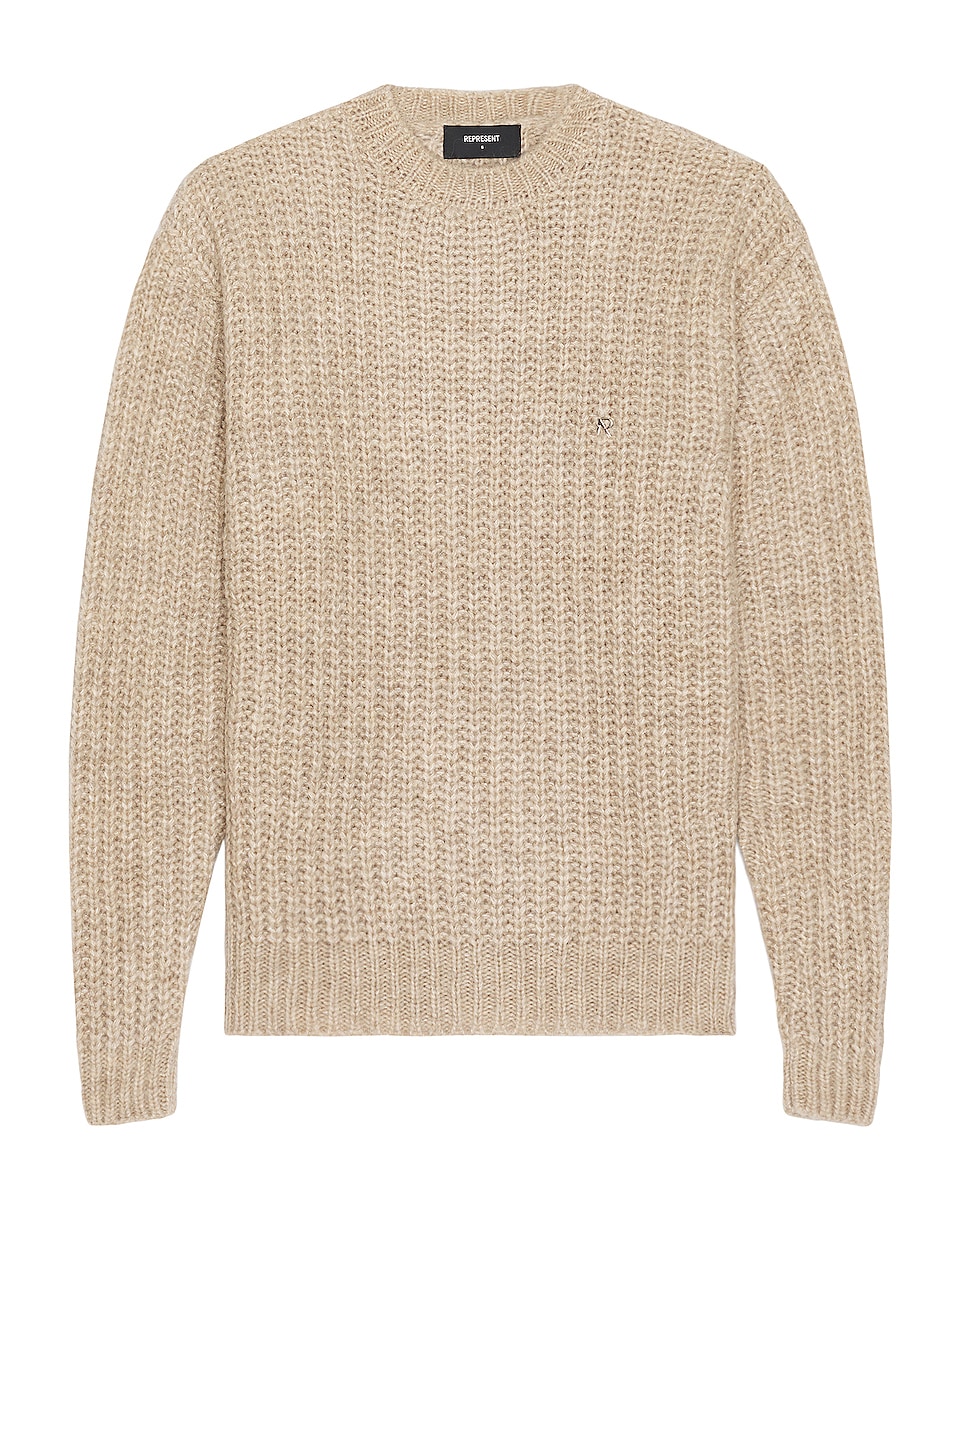 REPRESENT Heavy Rib Knitted Sweater in Wheat | REVOLVE